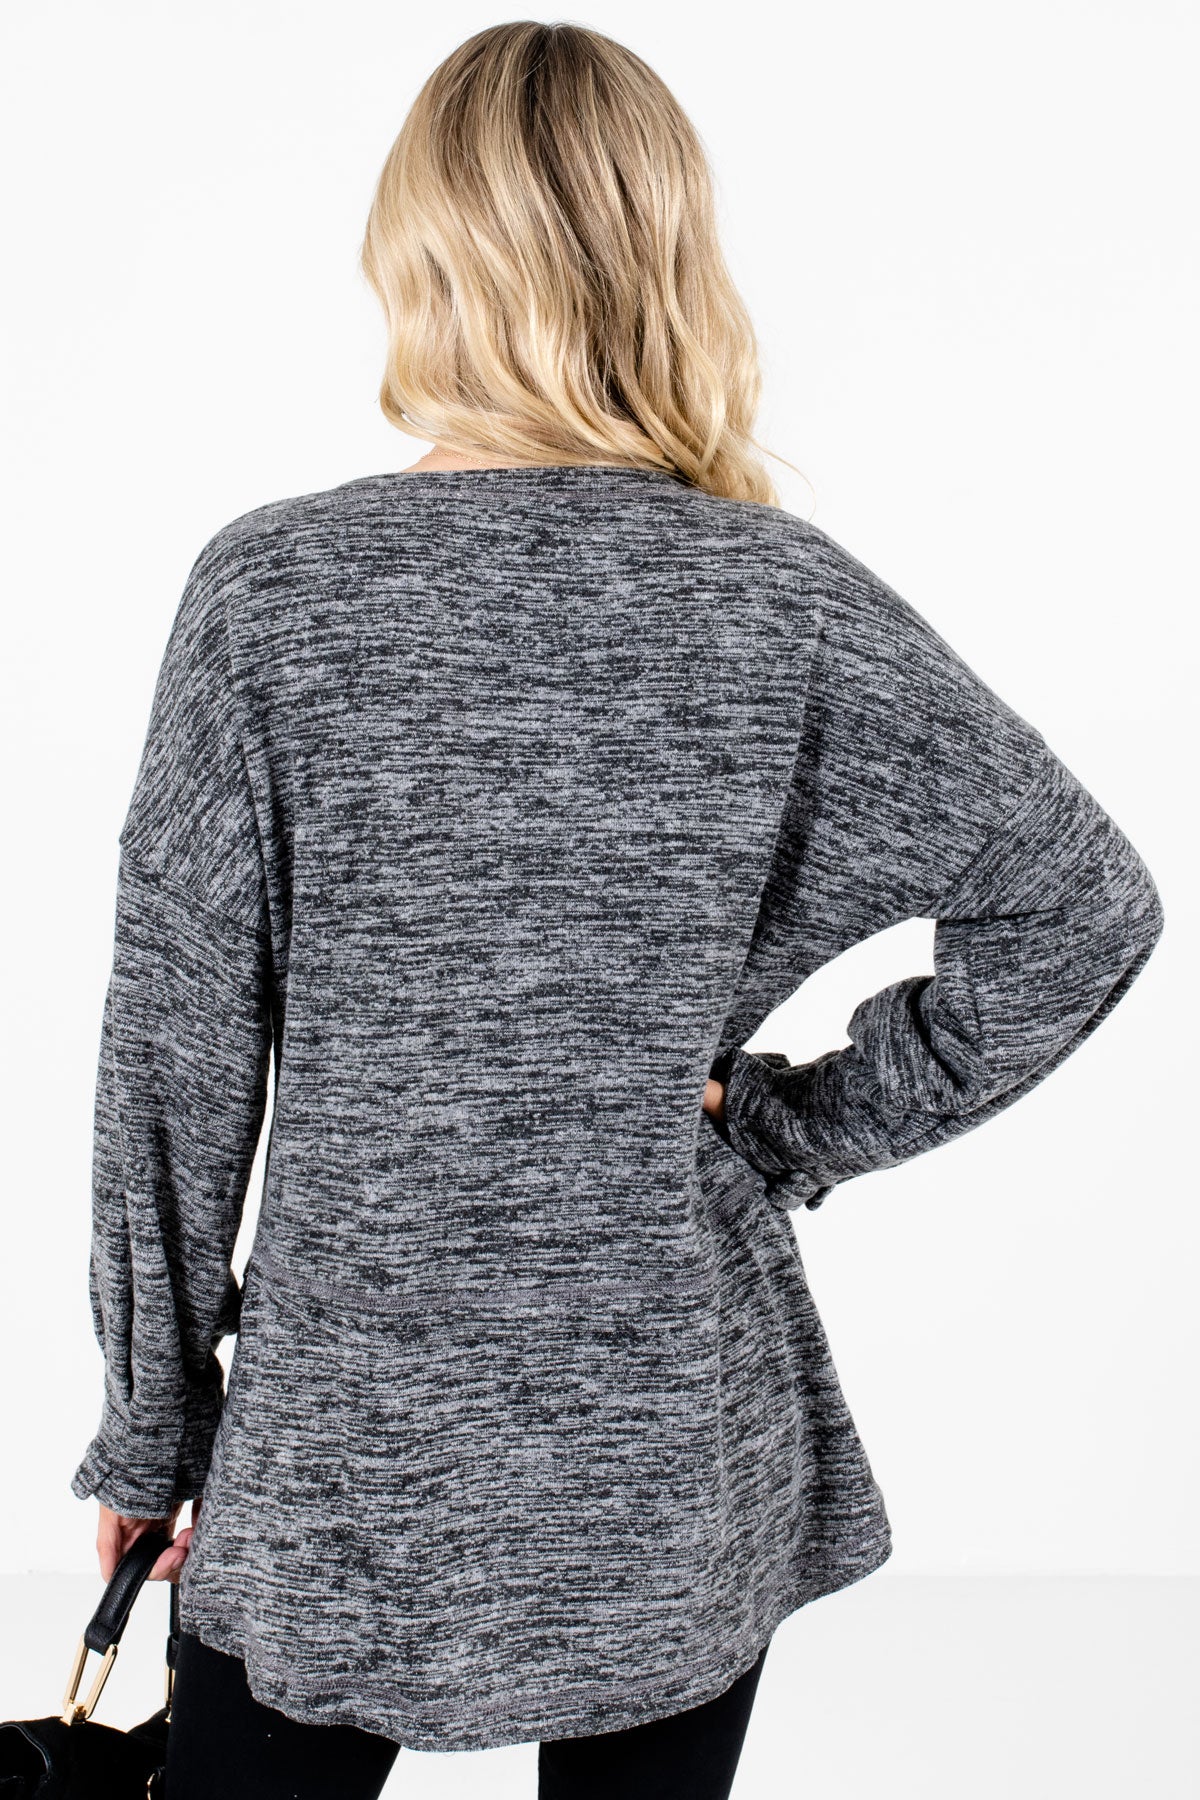 Women's Charcoal Gray Pleated Sleeve Cuff Boutique Tops